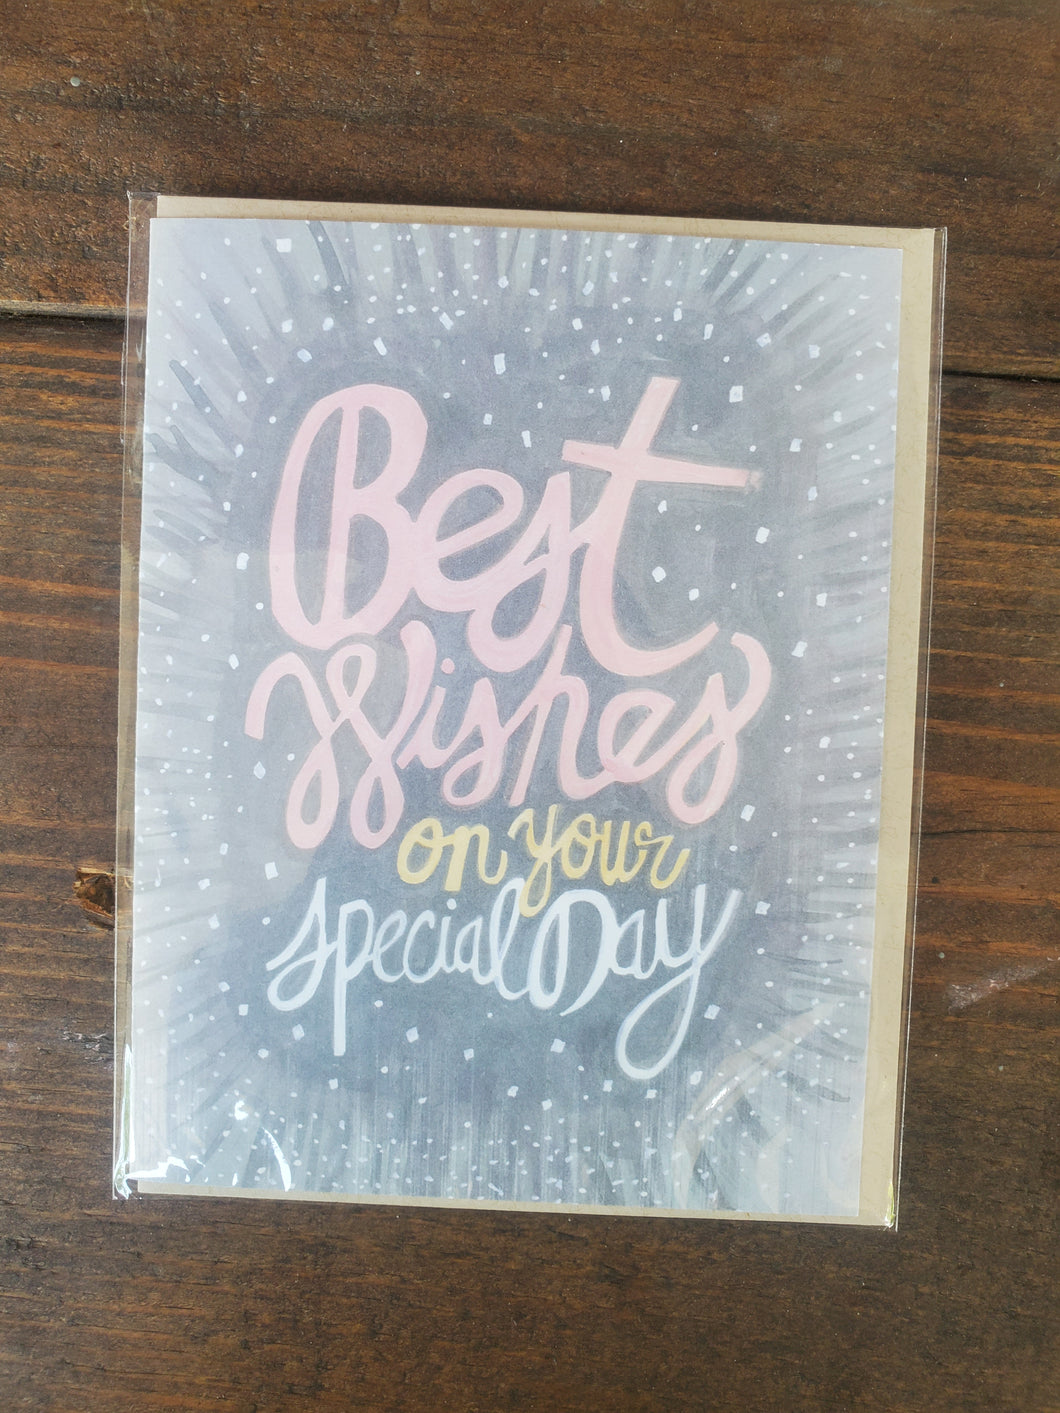 Best Wishes Gretting Card